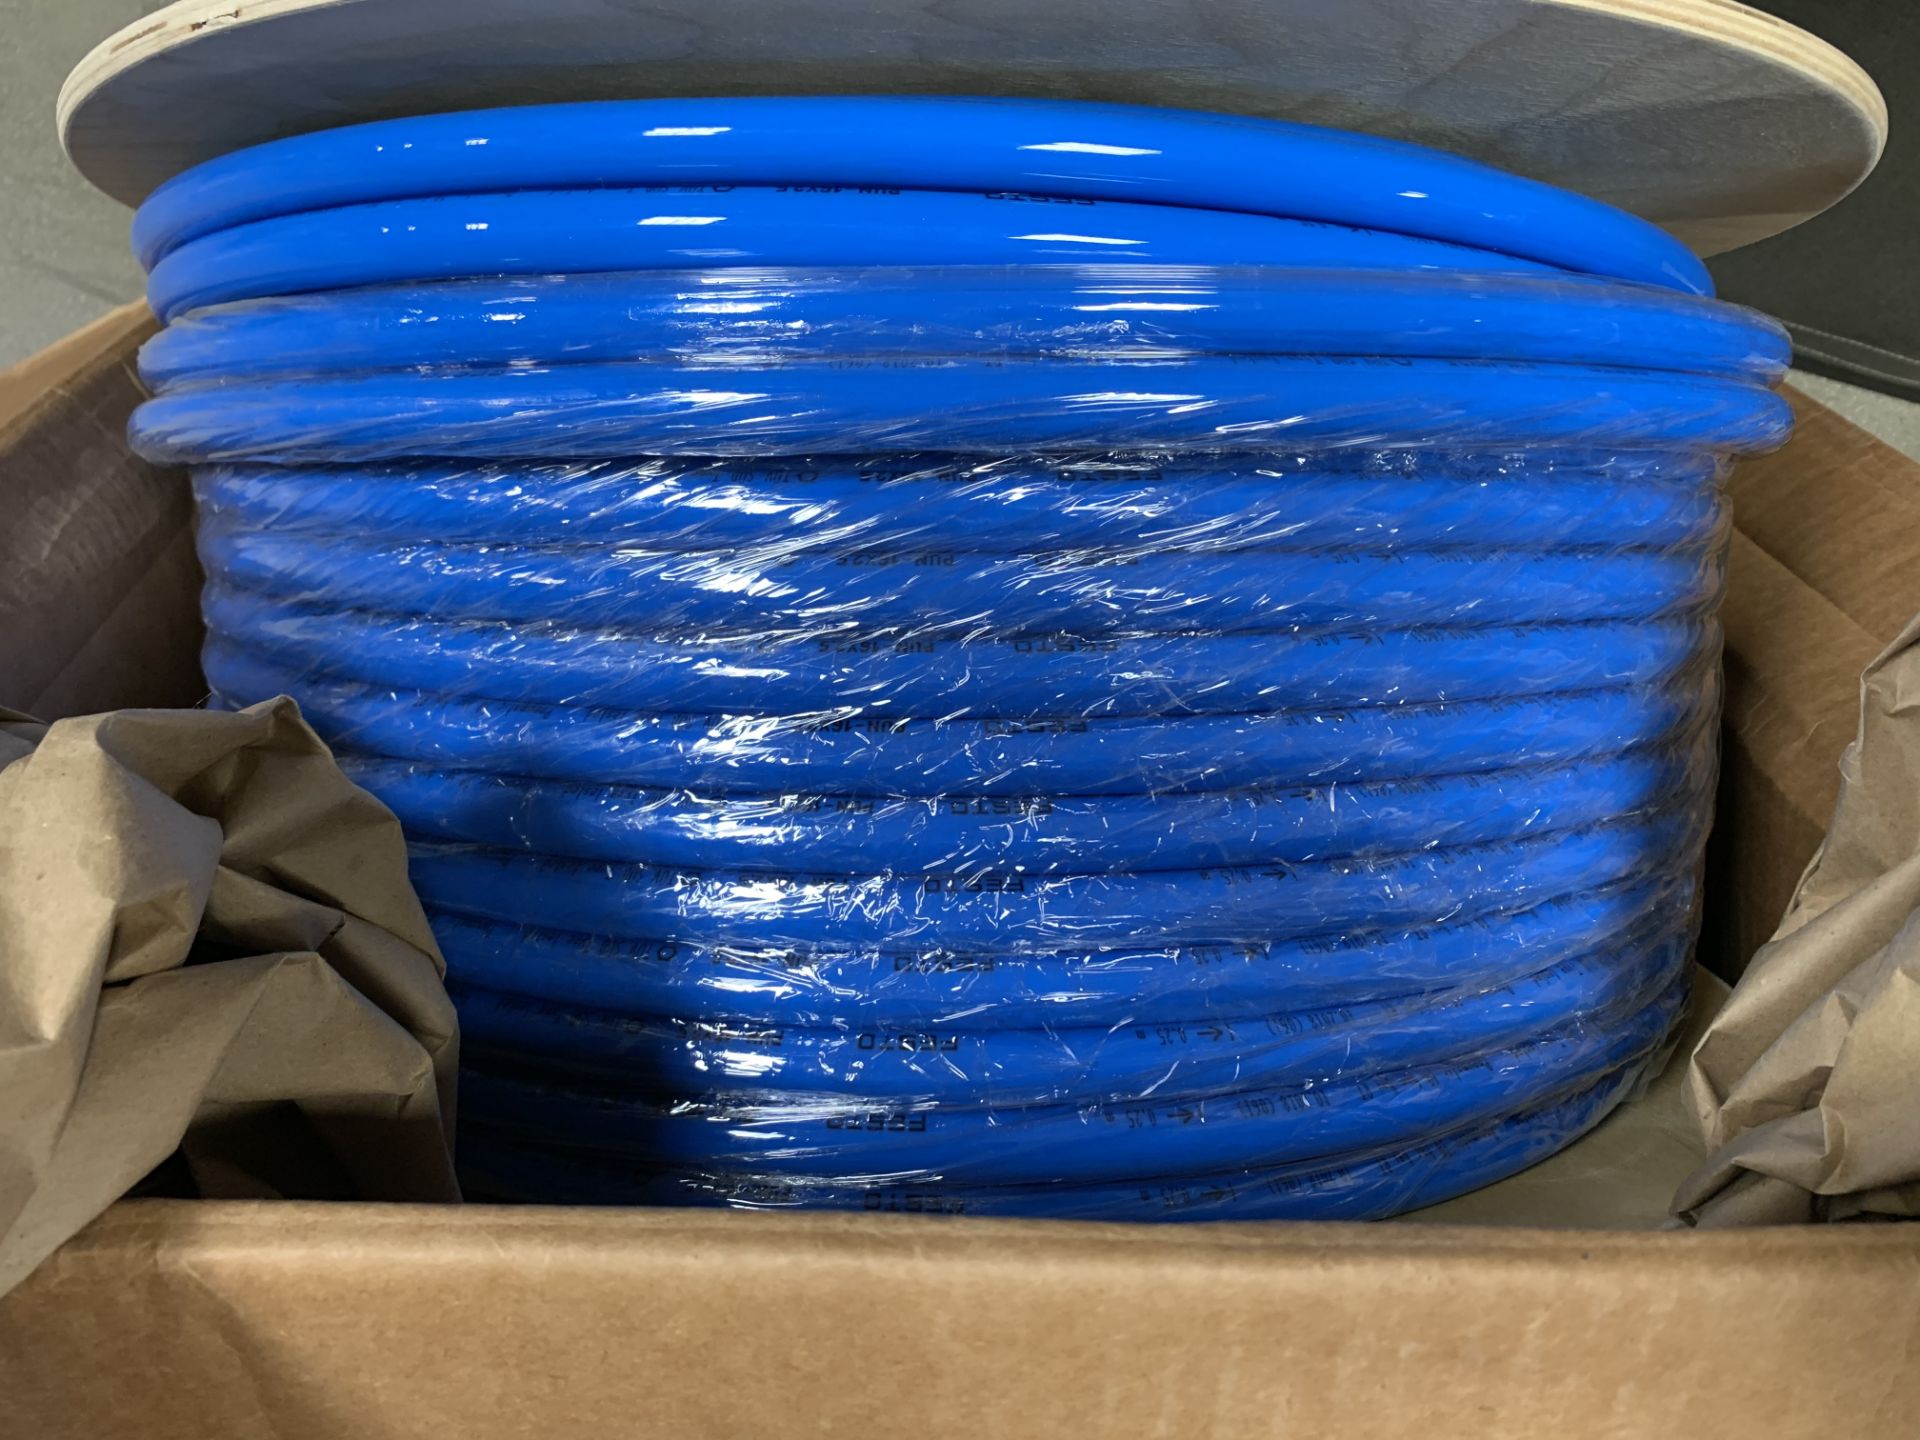 NEW OUT OF BOX - FESTO ELECTRIC REEL OF 100 METERS BLUE PLASTIC TUBING 525751 PUN-16X2,5-BL-100 - Image 3 of 3